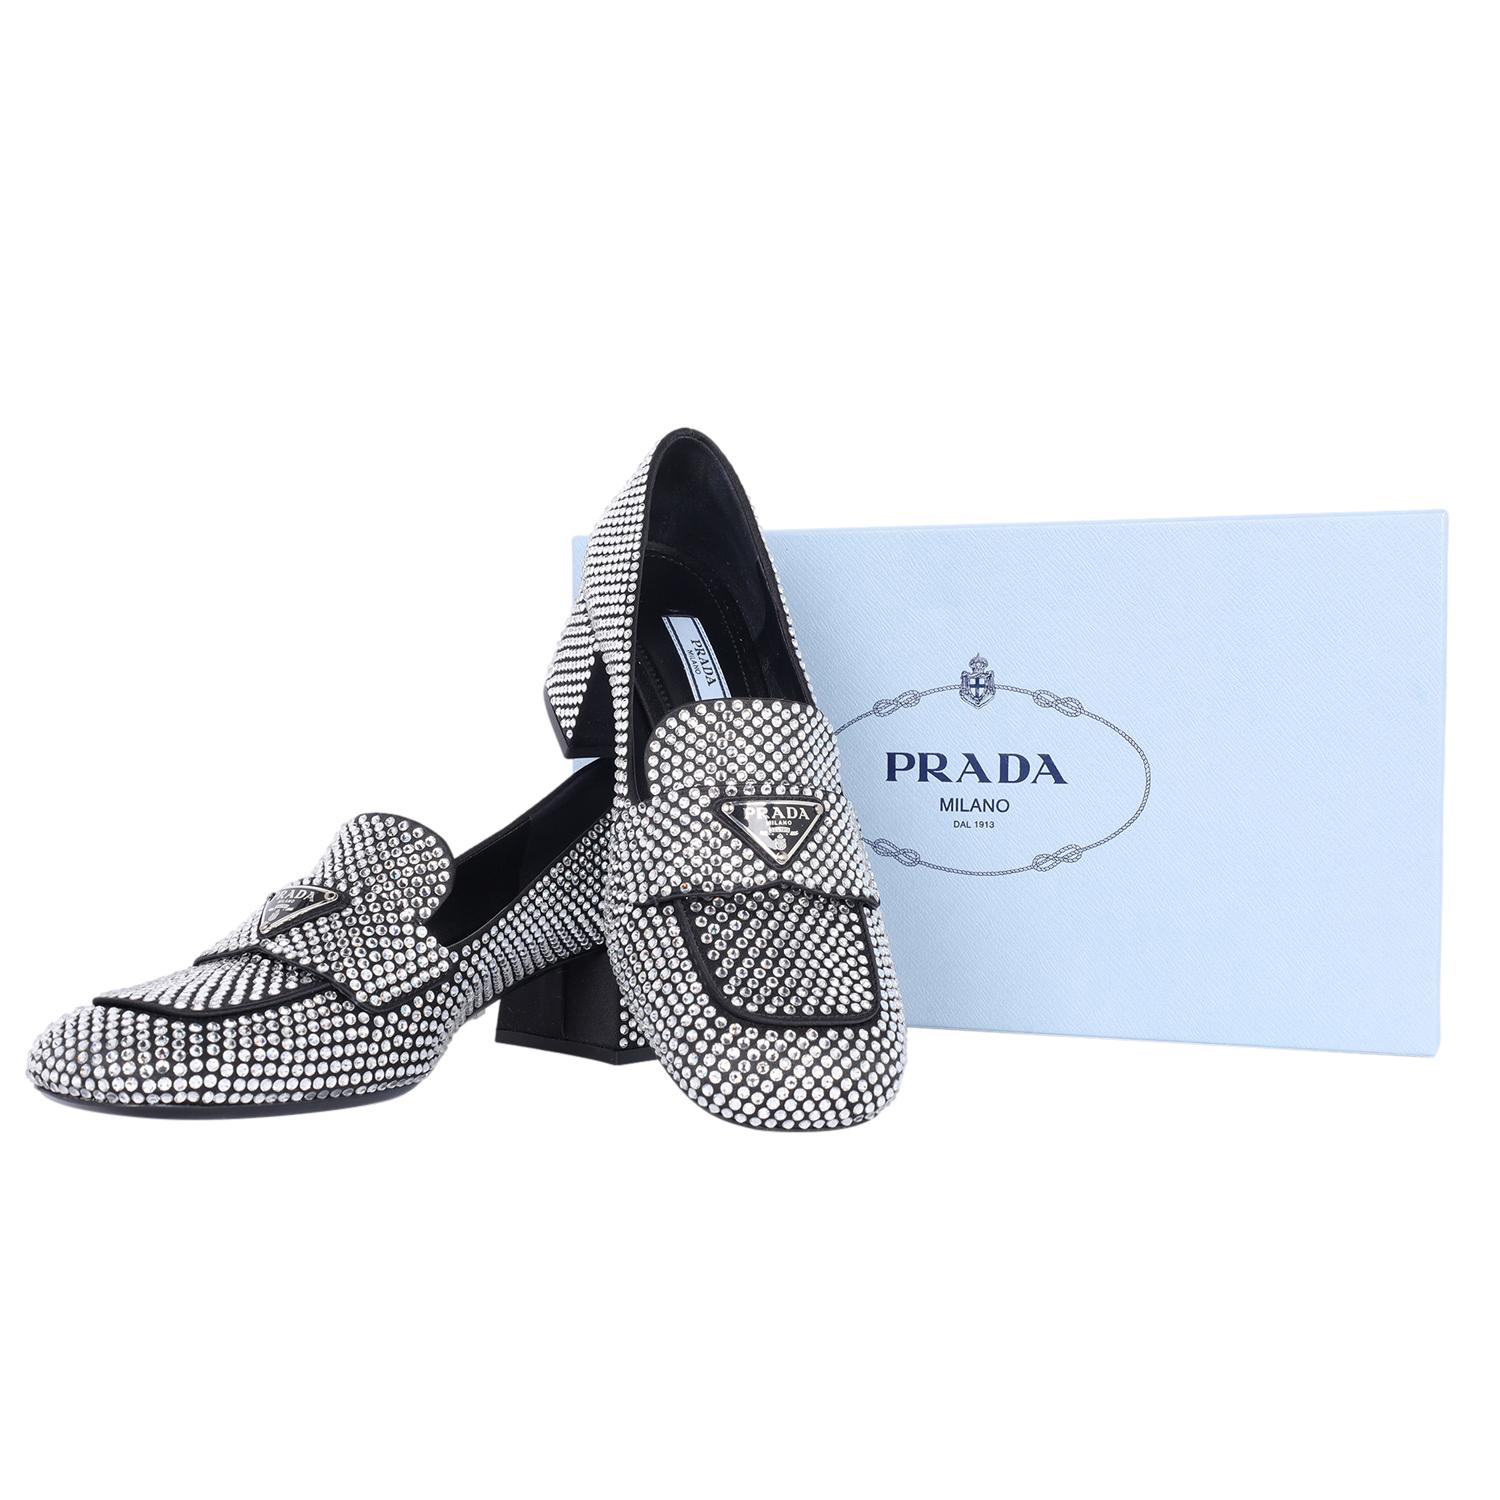 Authentic NEW Prada crystal embellished logo loafer pump shoes. These shoes are simply beautiful! 

Your going to love the sparkle.

Made in Italy   Size 35.5 - fits size 6 US

Size: EU 35.5 (Approx. US 6) Regular (M, B)

Condition
New
New in box